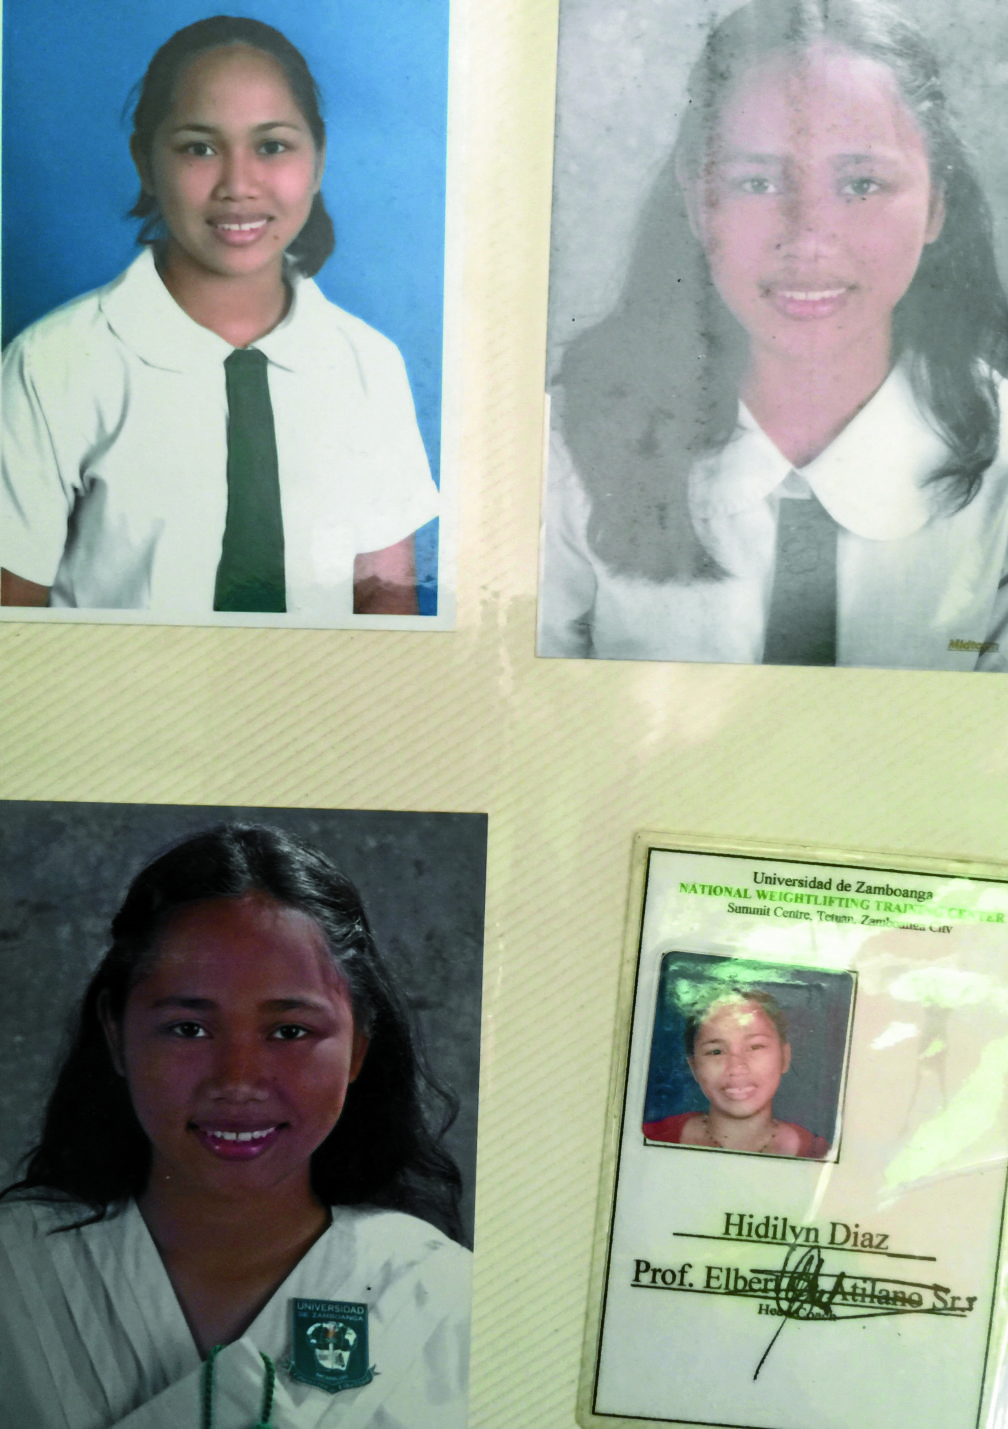 Hidilyn Diaz in her teenage years, highschool days at Universidad de Zamboanga Technical School. In her younger days, Hidilyn Diaz already tried bigger weights beyond her weight. REPRODUCTION PHOTO BY JULIE ALIPALA